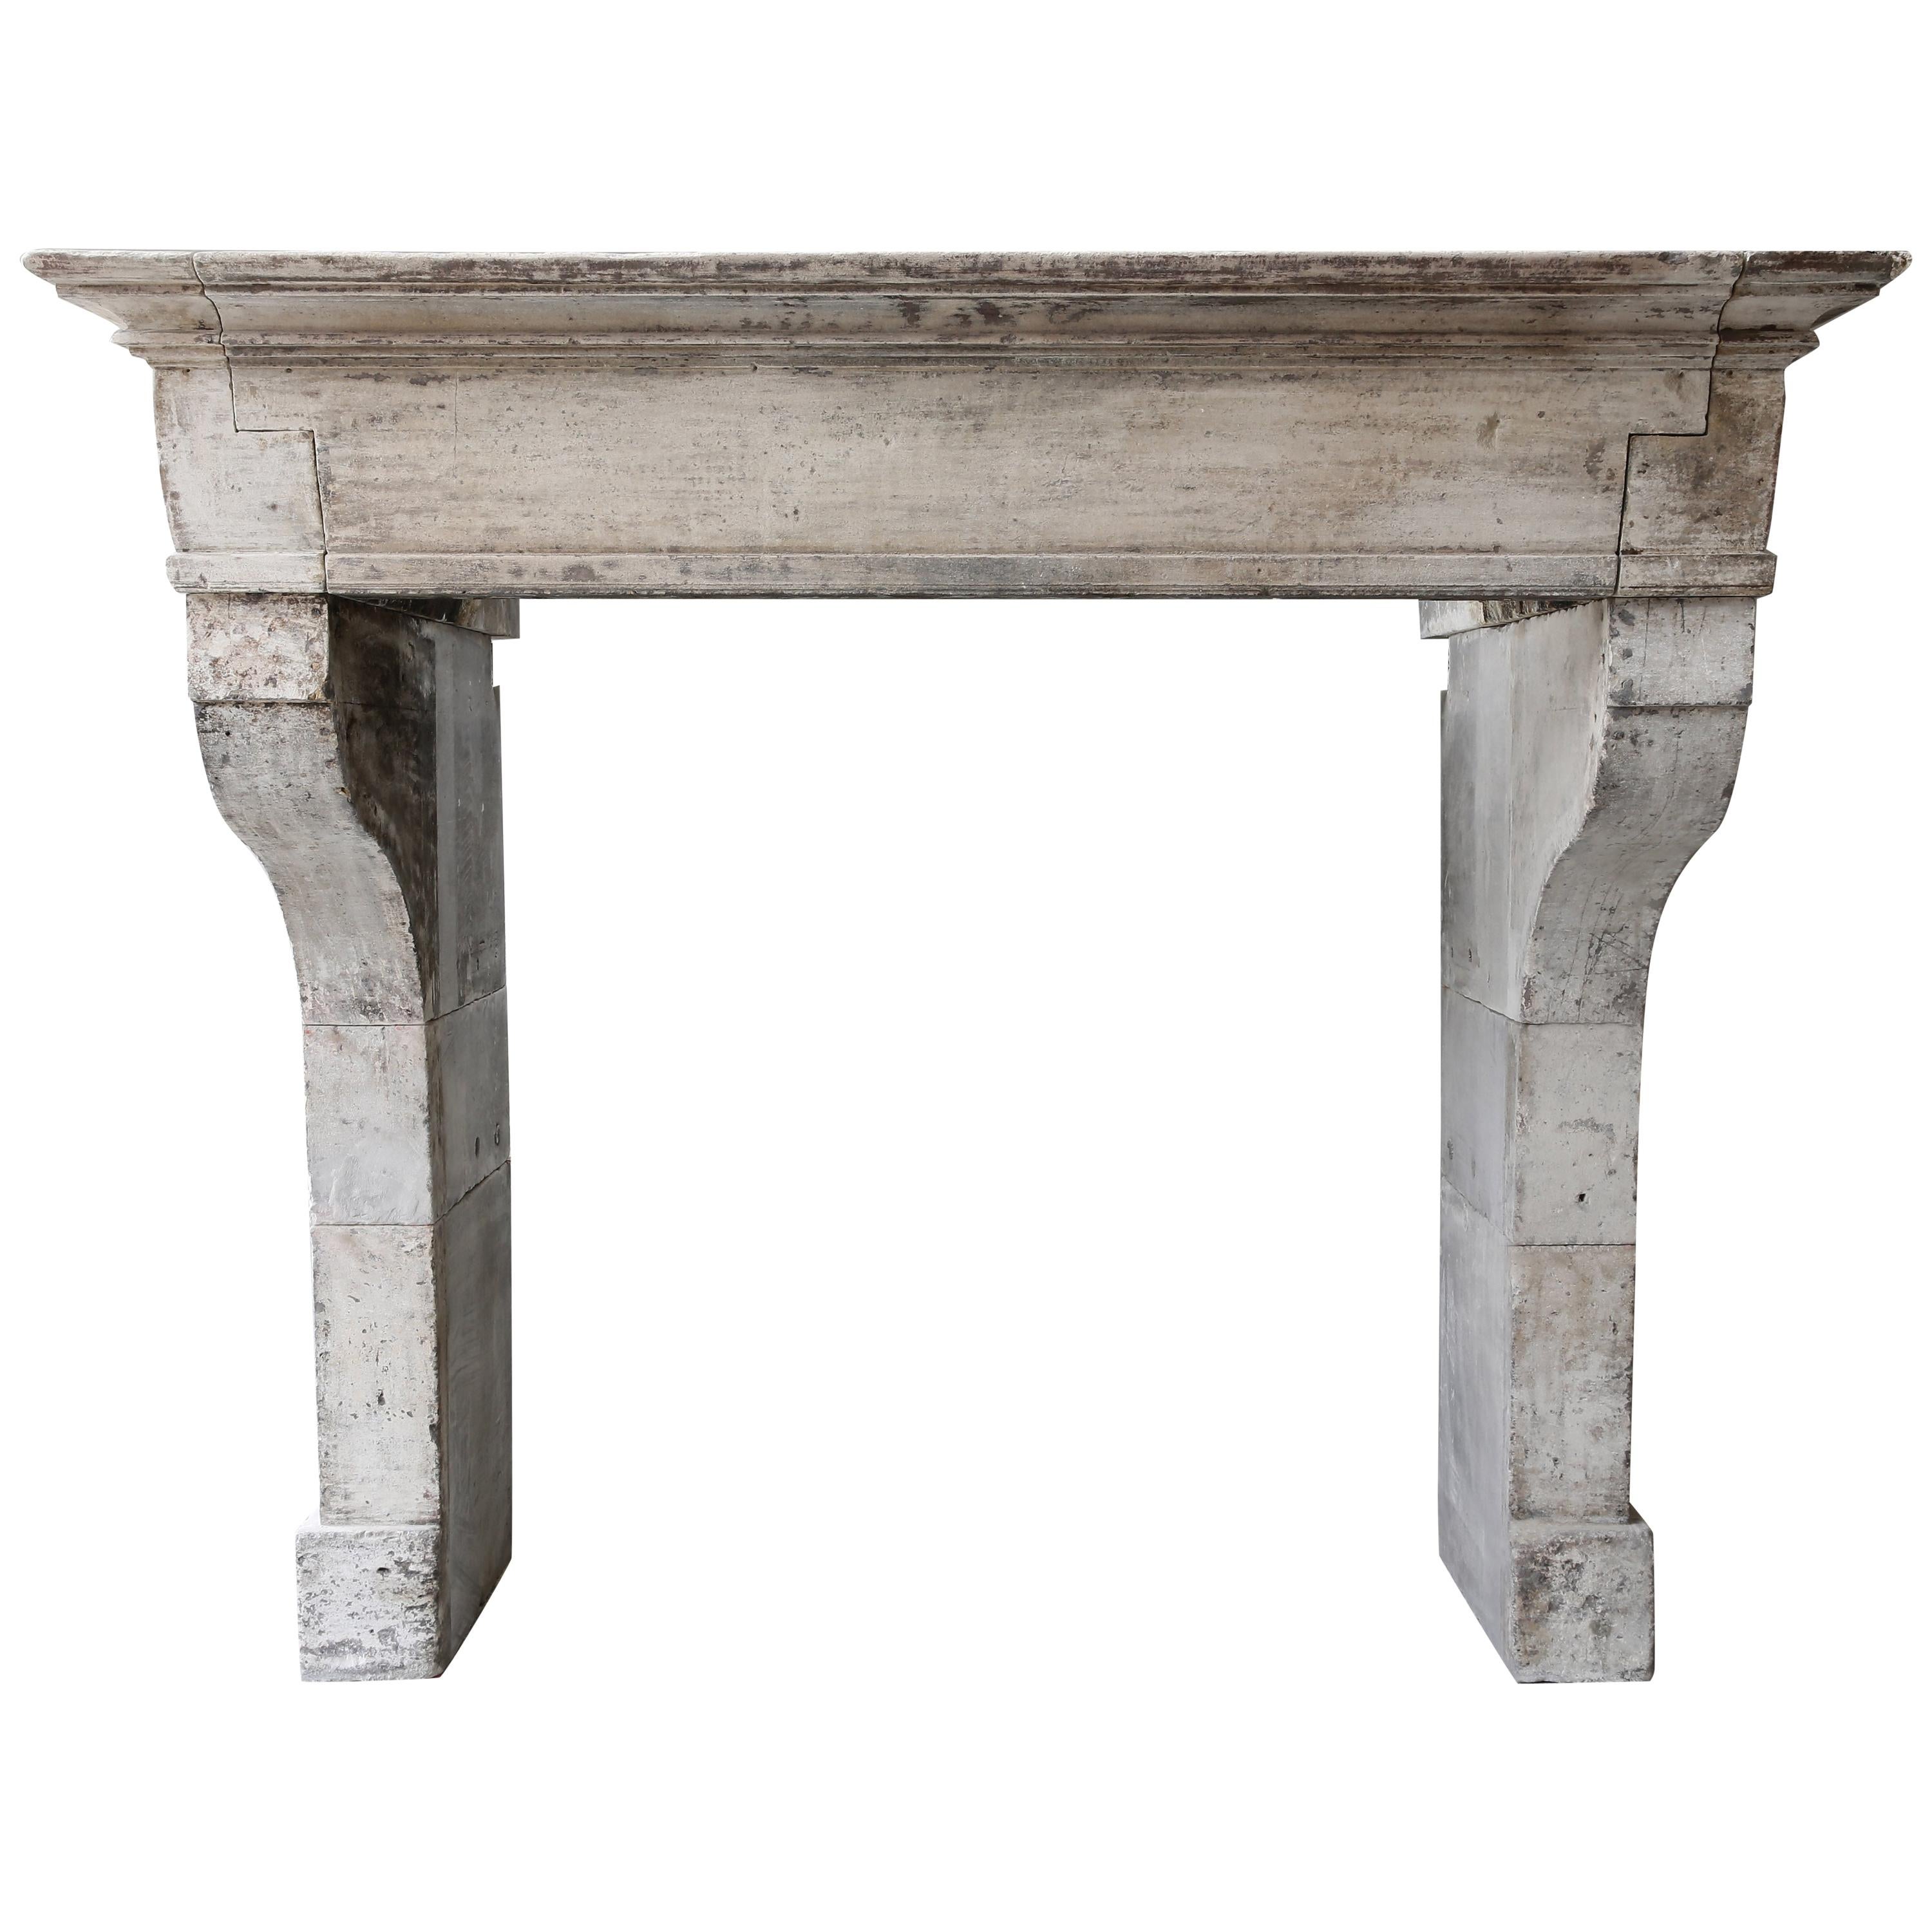 Campangarde Style Mantel from the 19th Century of French Limestone